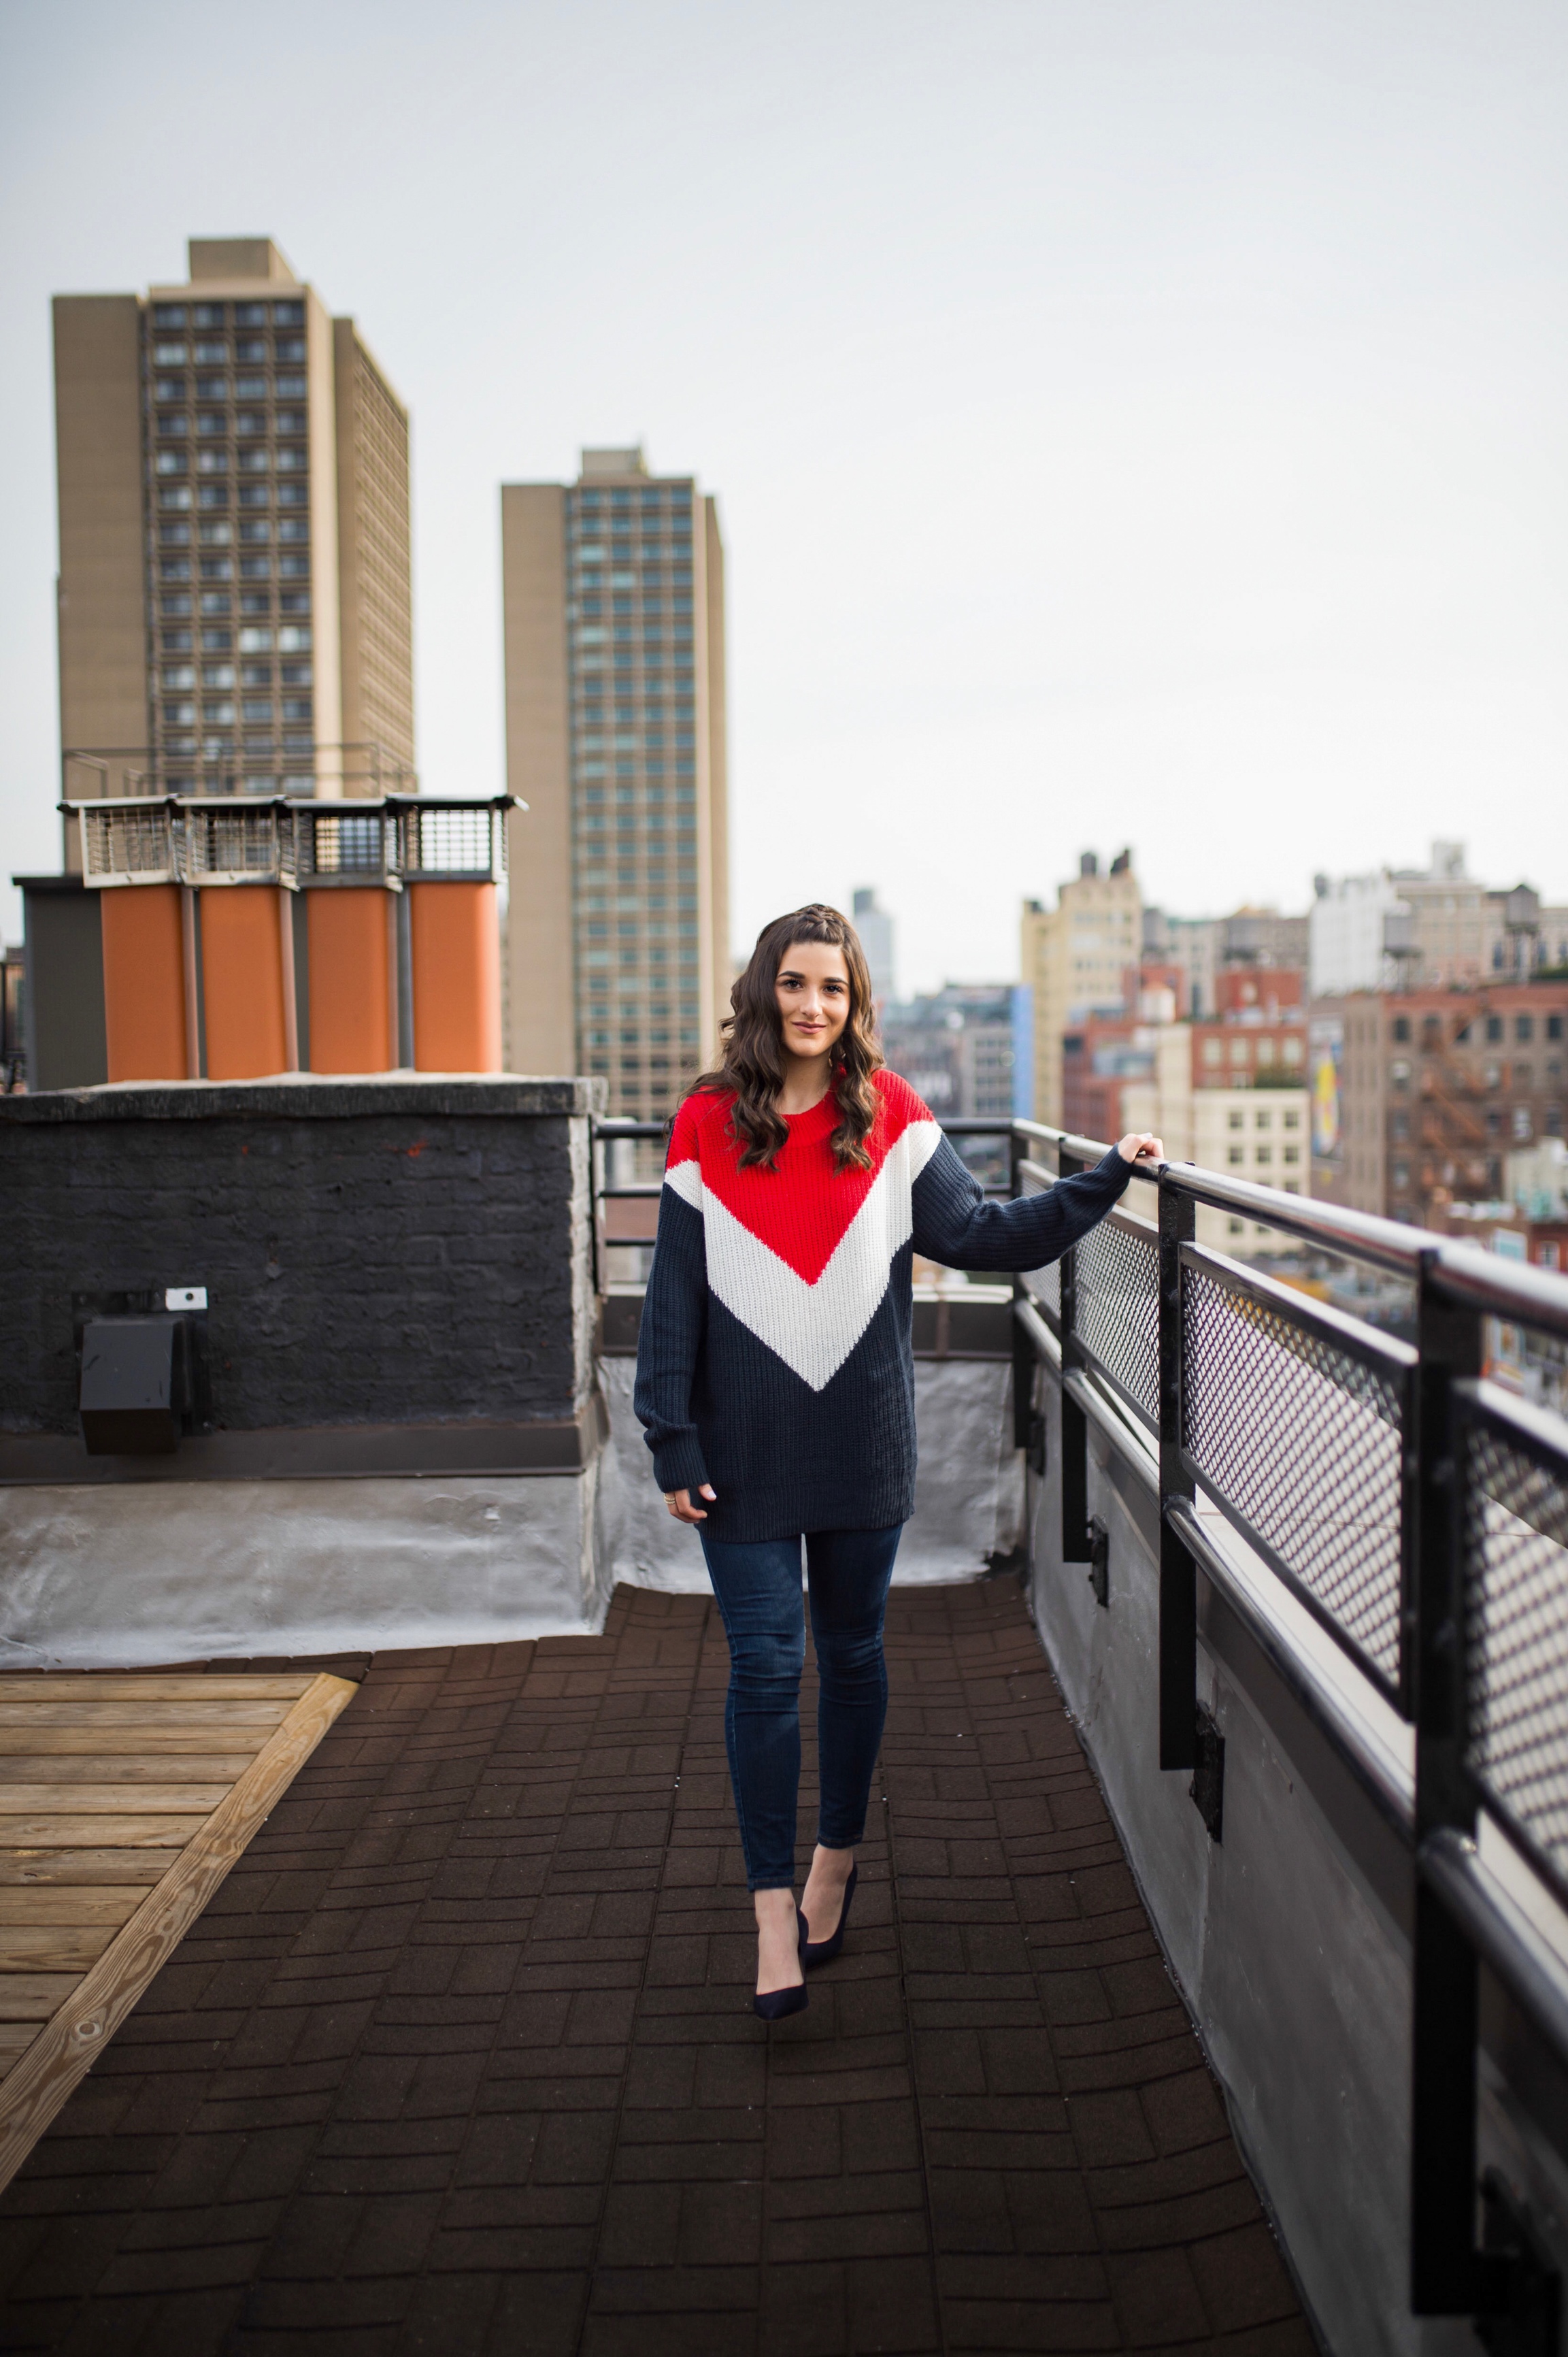 Advice For The Micro-influencer Oversized Sweater Navy Heels Esther Santer Fashion Blog NYC Street Style Blogger Outfit OOTD Trendy Shopping Subtle Balayage Highlights Hair Jeans Sally Hershberger Chic Girl How To Wear Red White Blue Winter Women 2018.jpg